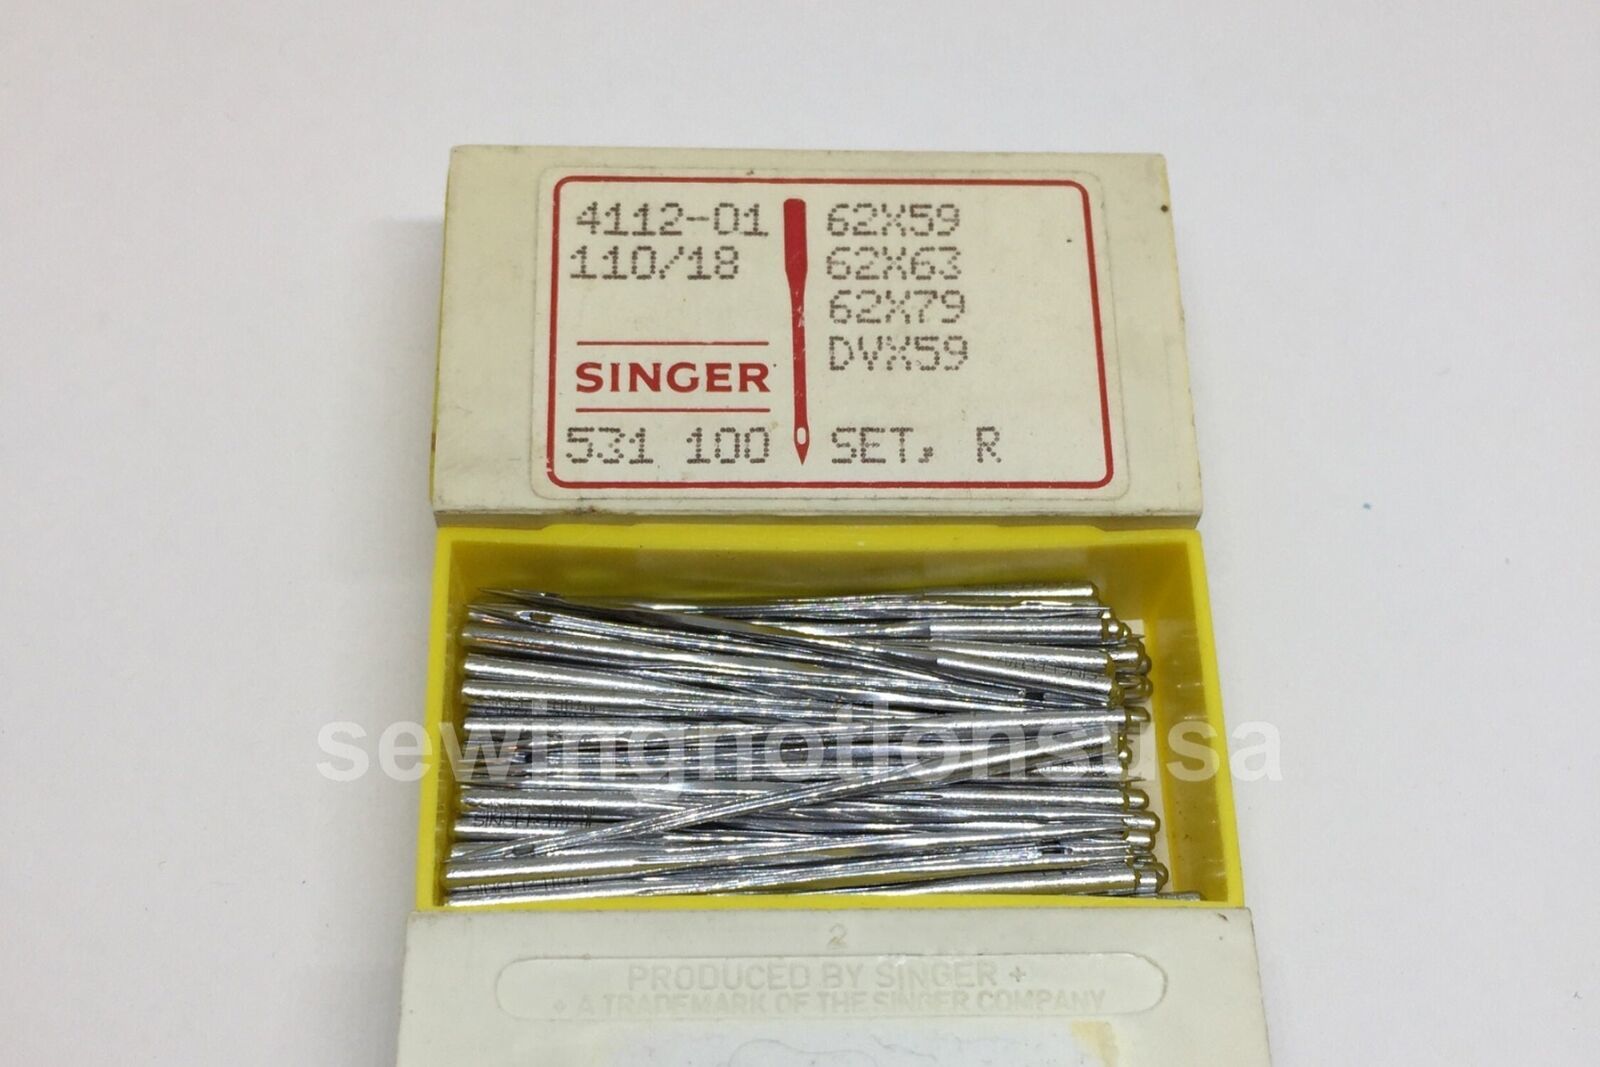 Pre-Threaded Sewing Needles